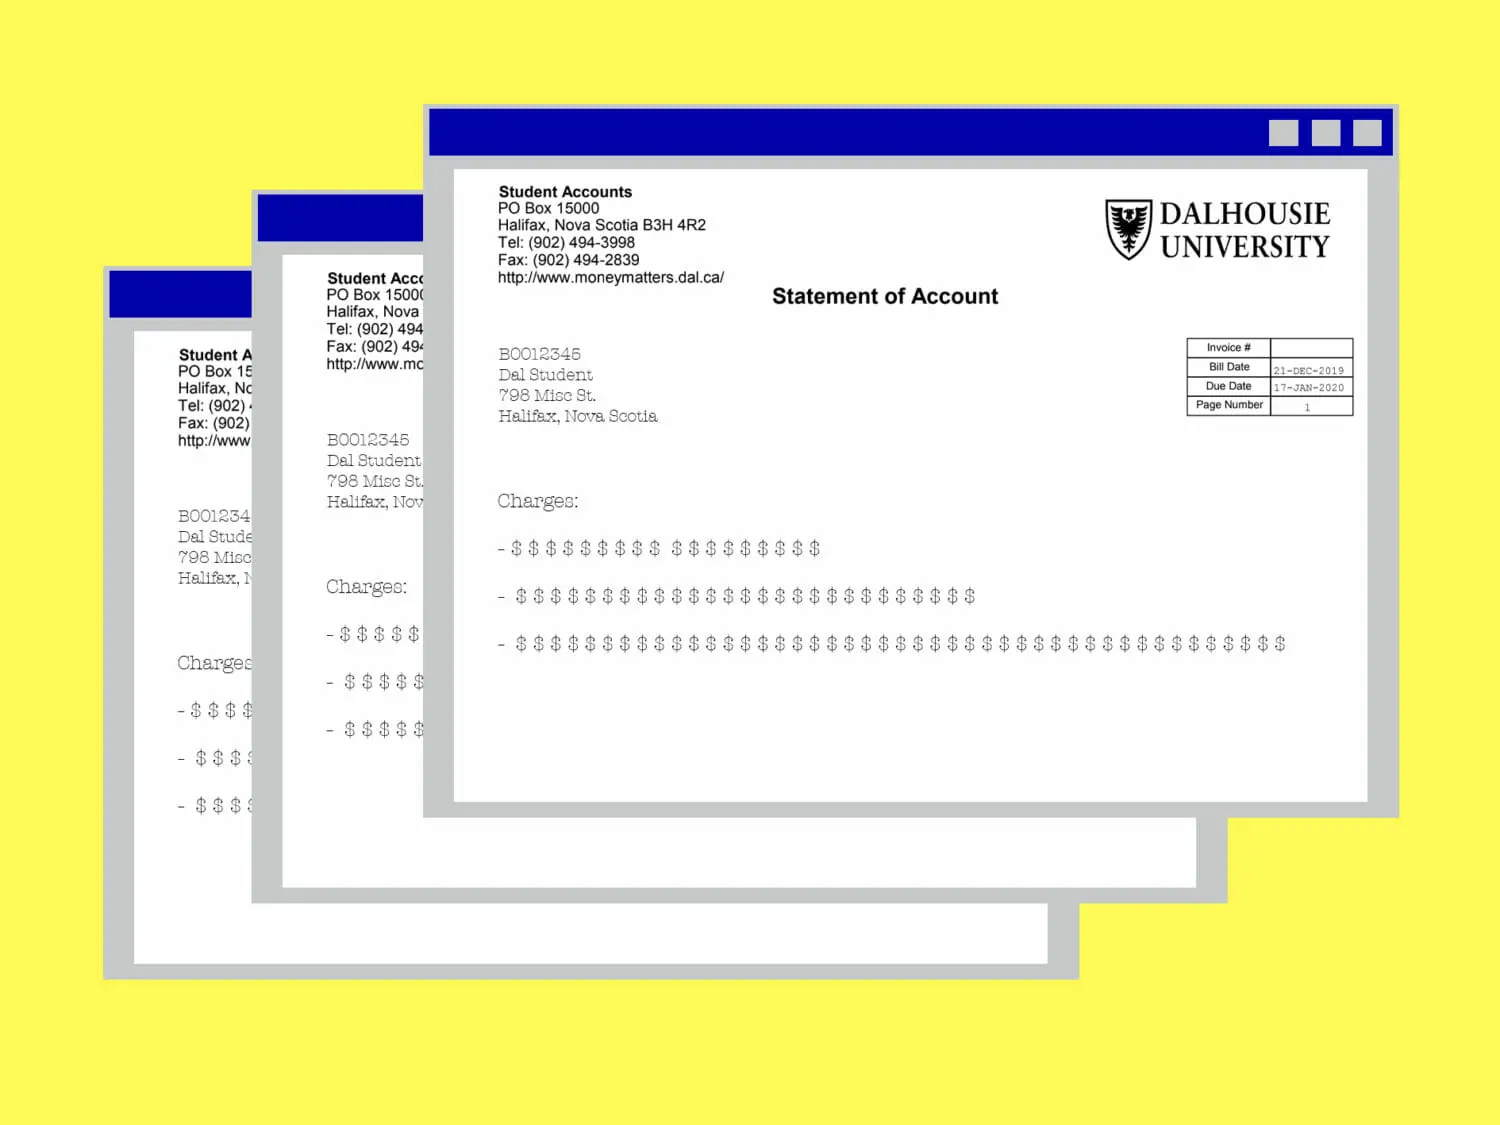 In this image: A graphic showing a Dalhousie University Statement of Account.